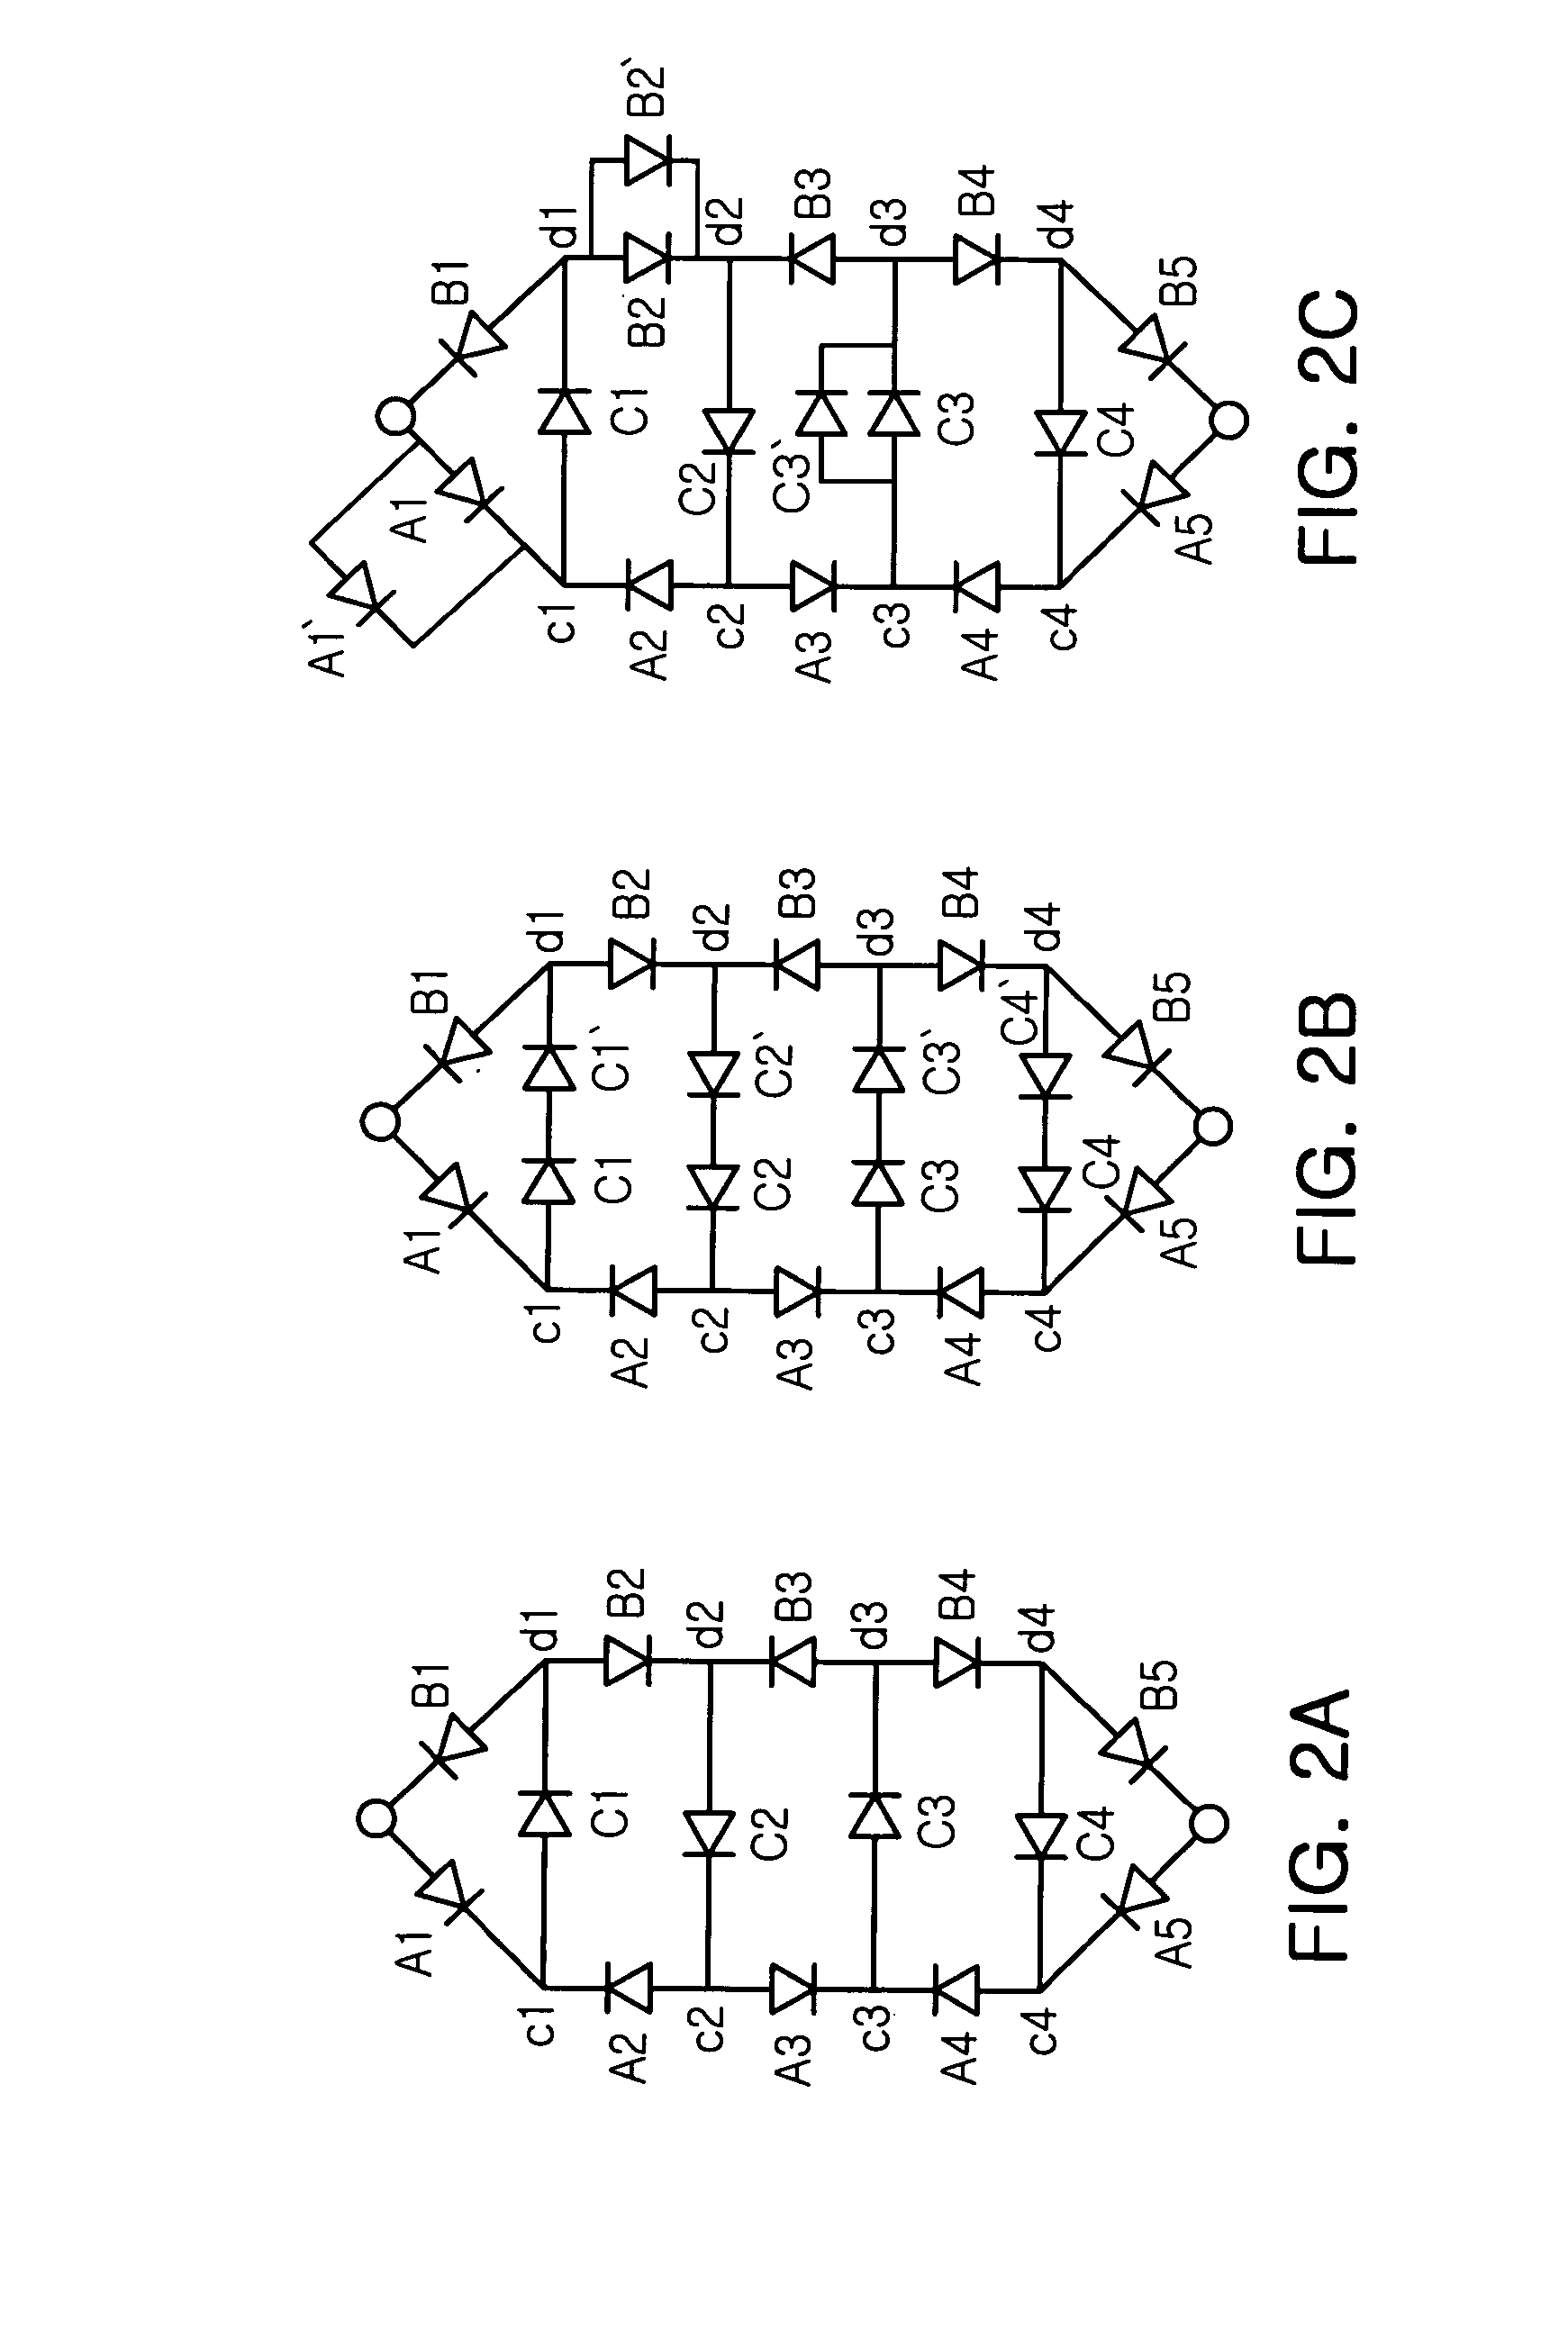 Light emitting diode driving circuit and light emitting diode array device